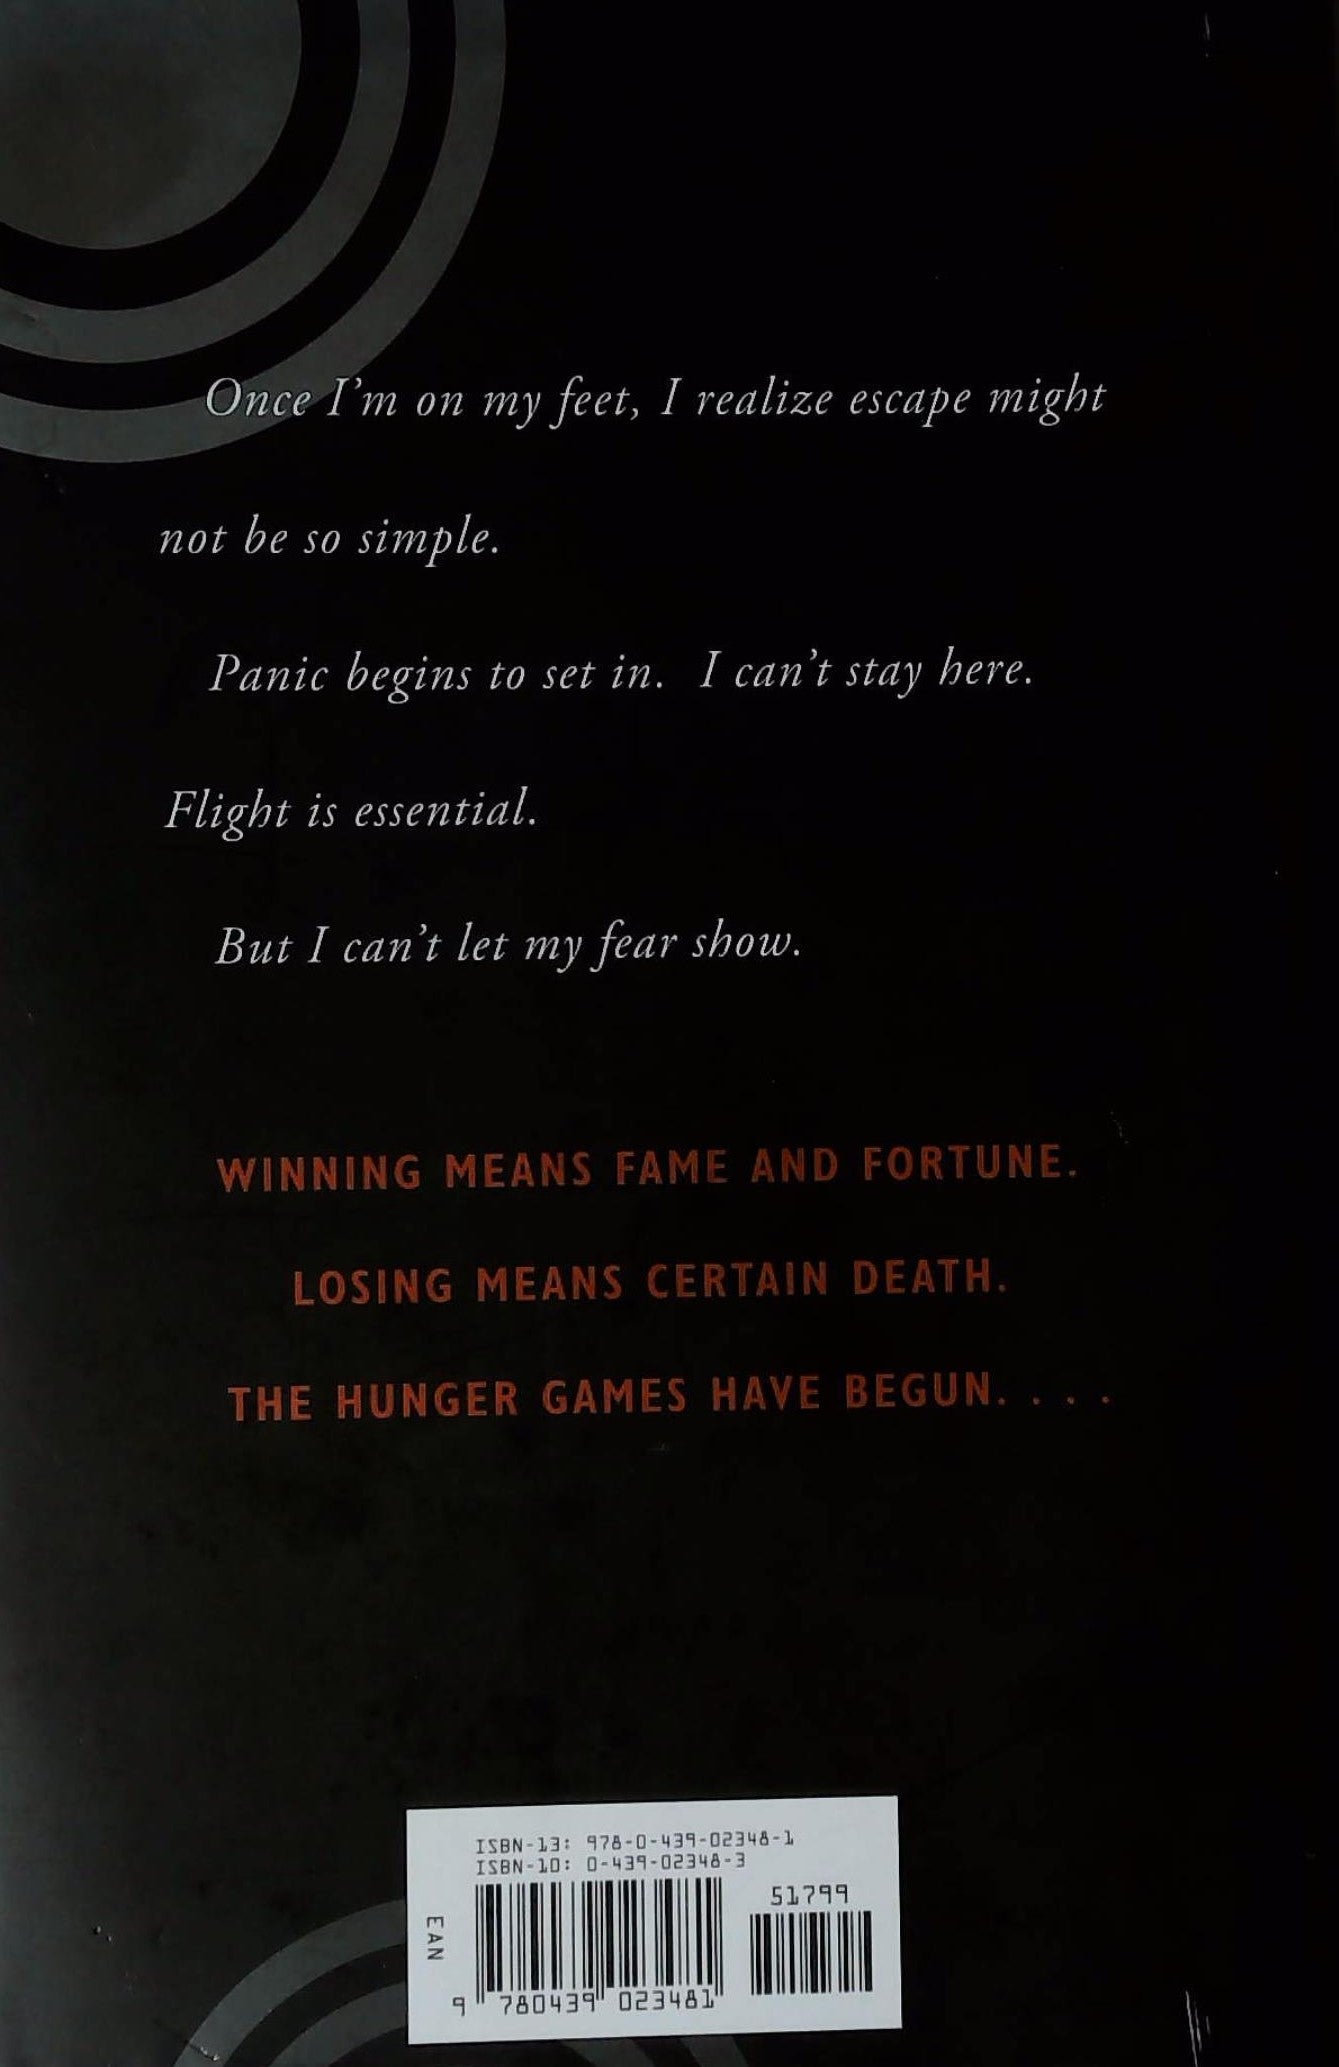 The Hunger Games (EN) # 1 (Suzanne Collins)